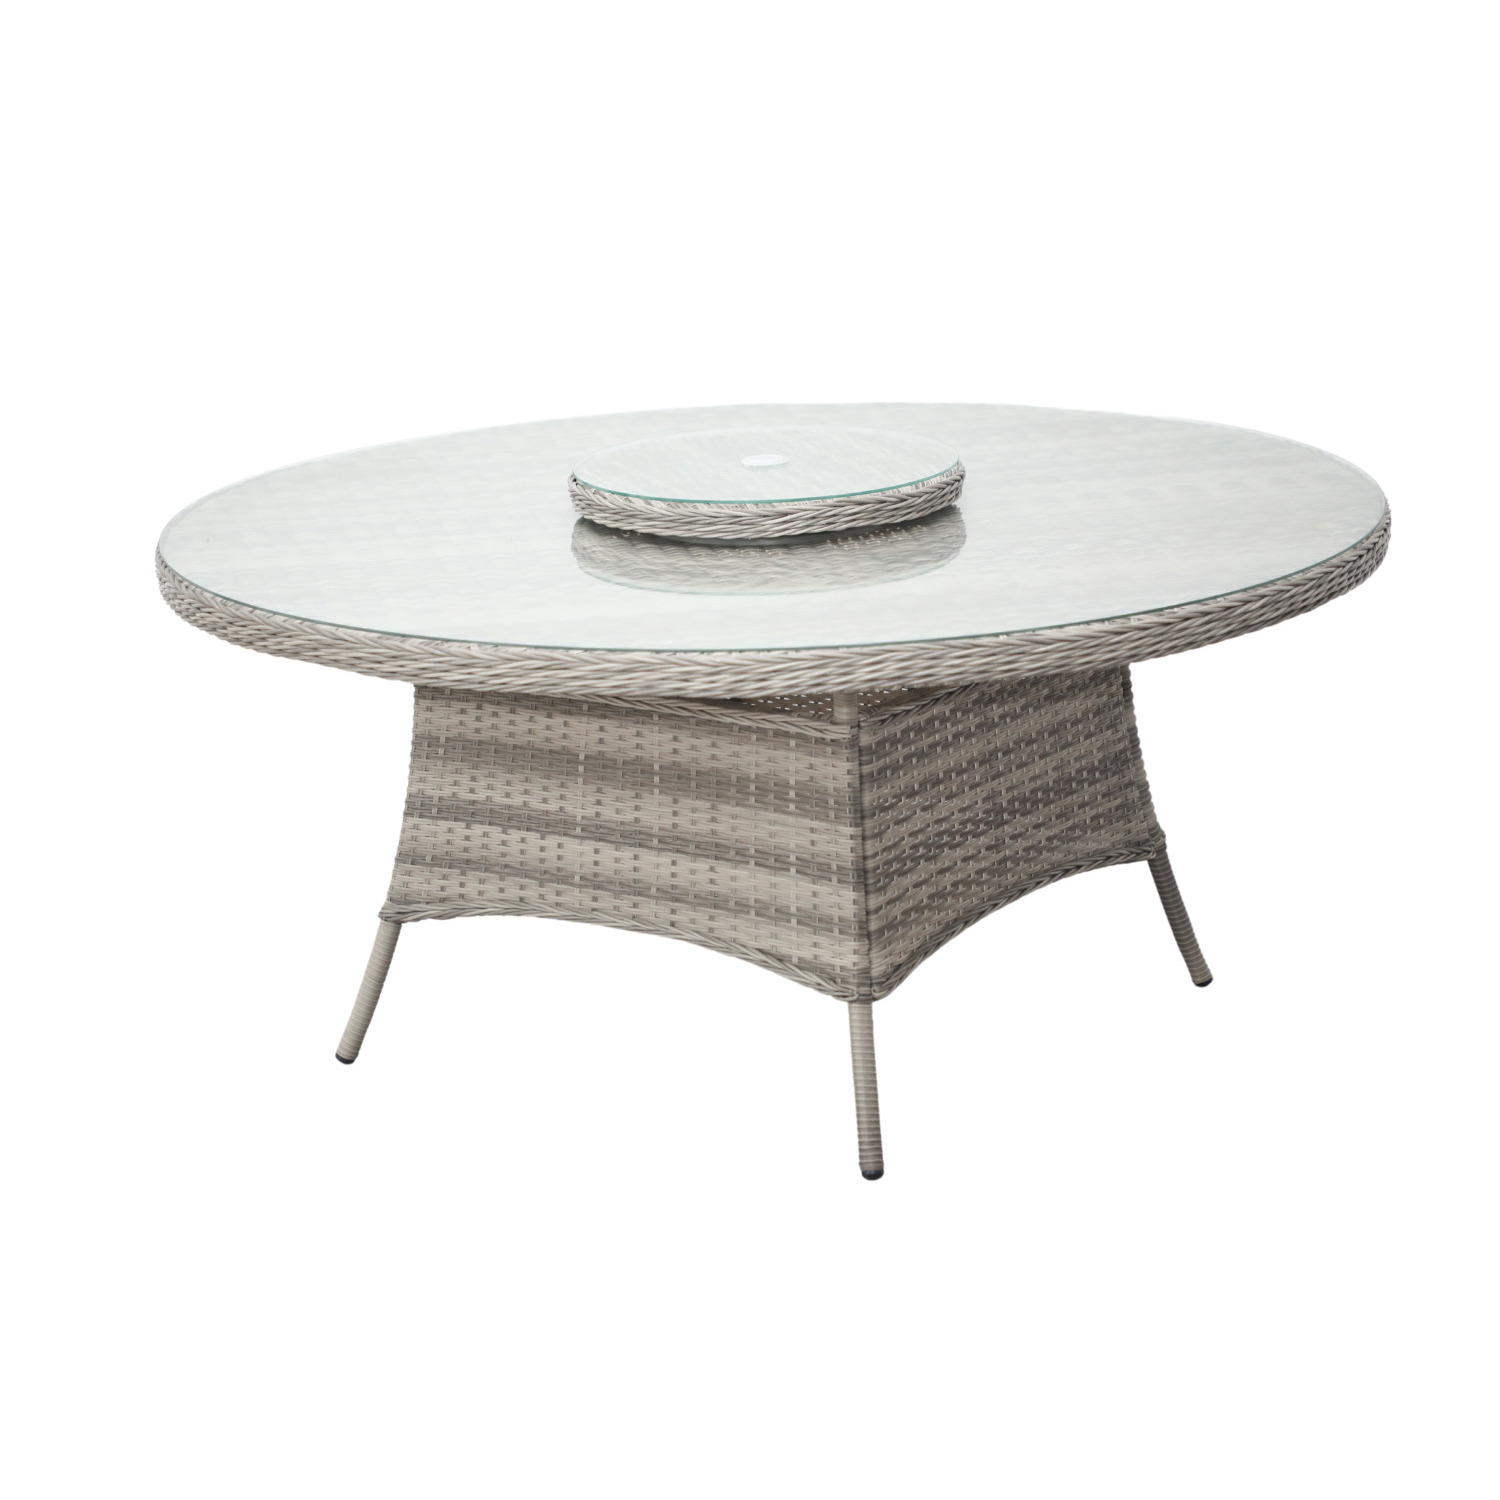 Large Round Rattan Garden Dining Table with Lazy Susan in Grey - Rattan Direct